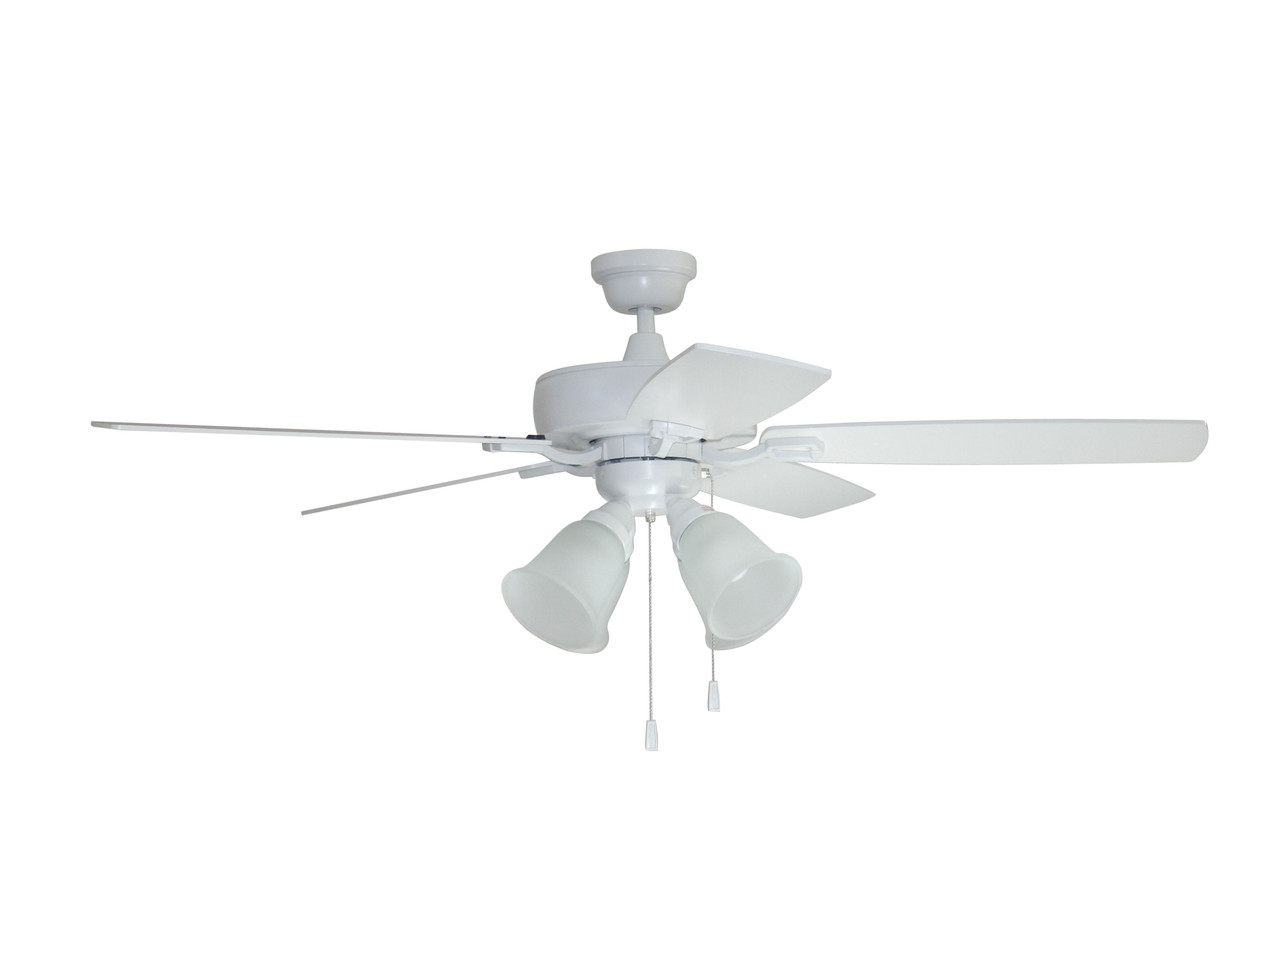 Craftmade Ceiling Fan with LED Light TCE52BNK5C1 Twist N Click 52 Inch, Brushed Polished Nickel - 3